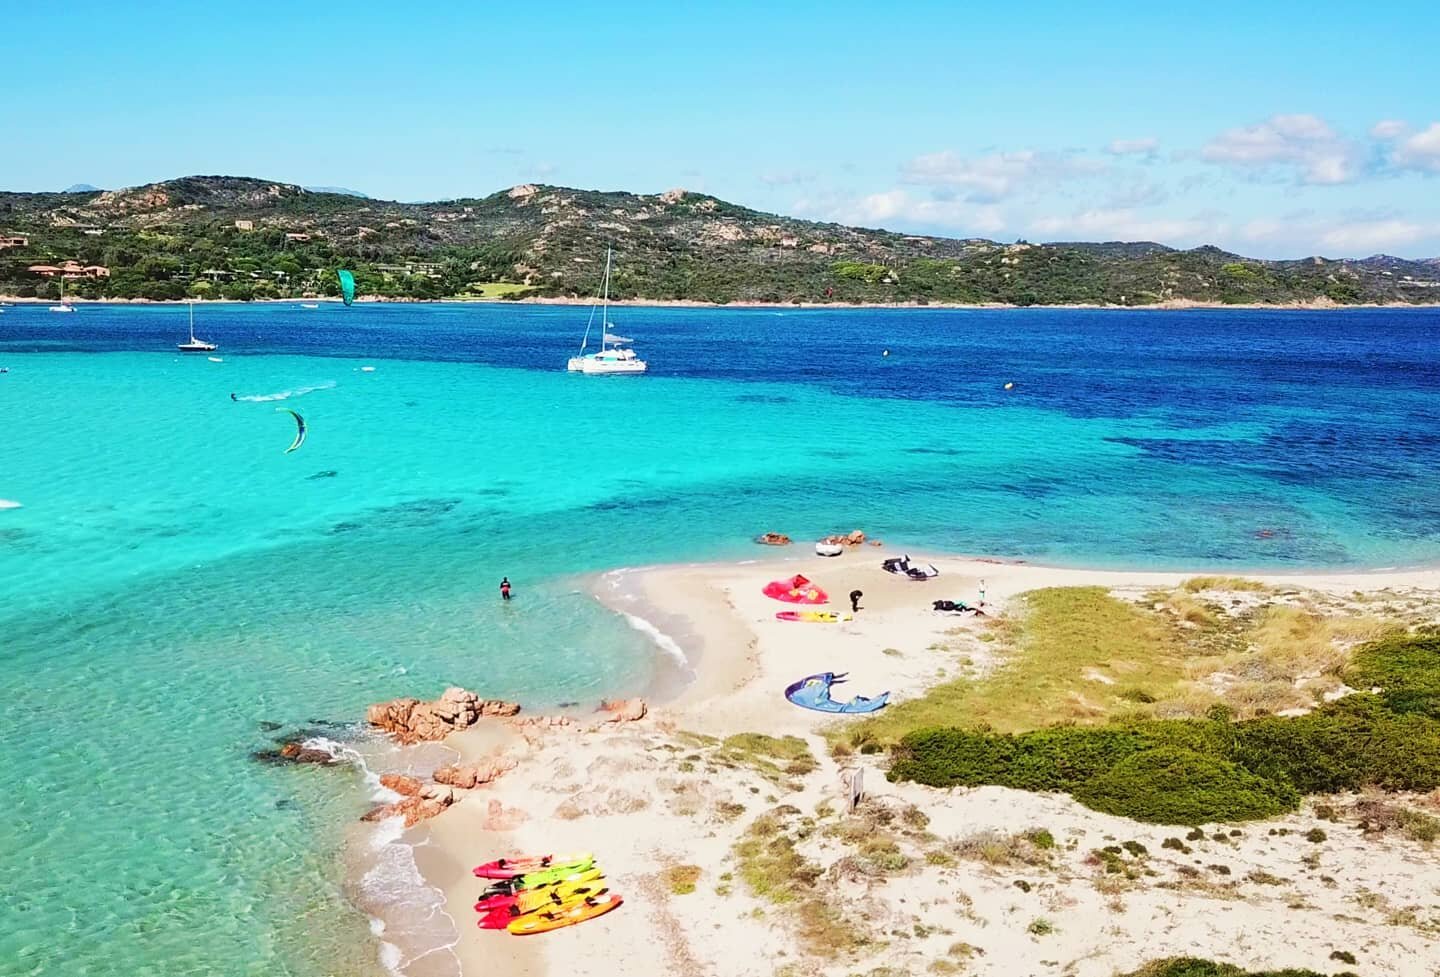 North Sardinia is the place where to open the Mediterranean Kite Cruise Season ⛵🇮🇹🤟
.
Opening) 2 Apr &ndash; 11 Apr&nbsp;
1) 23 May &ndash; 29 May&nbsp;
2) 30 May &ndash; 05 June&nbsp;
3) 06 June &ndash; 12 June&nbsp;
4) 26 Sept &ndash; 02 Oct&nbs